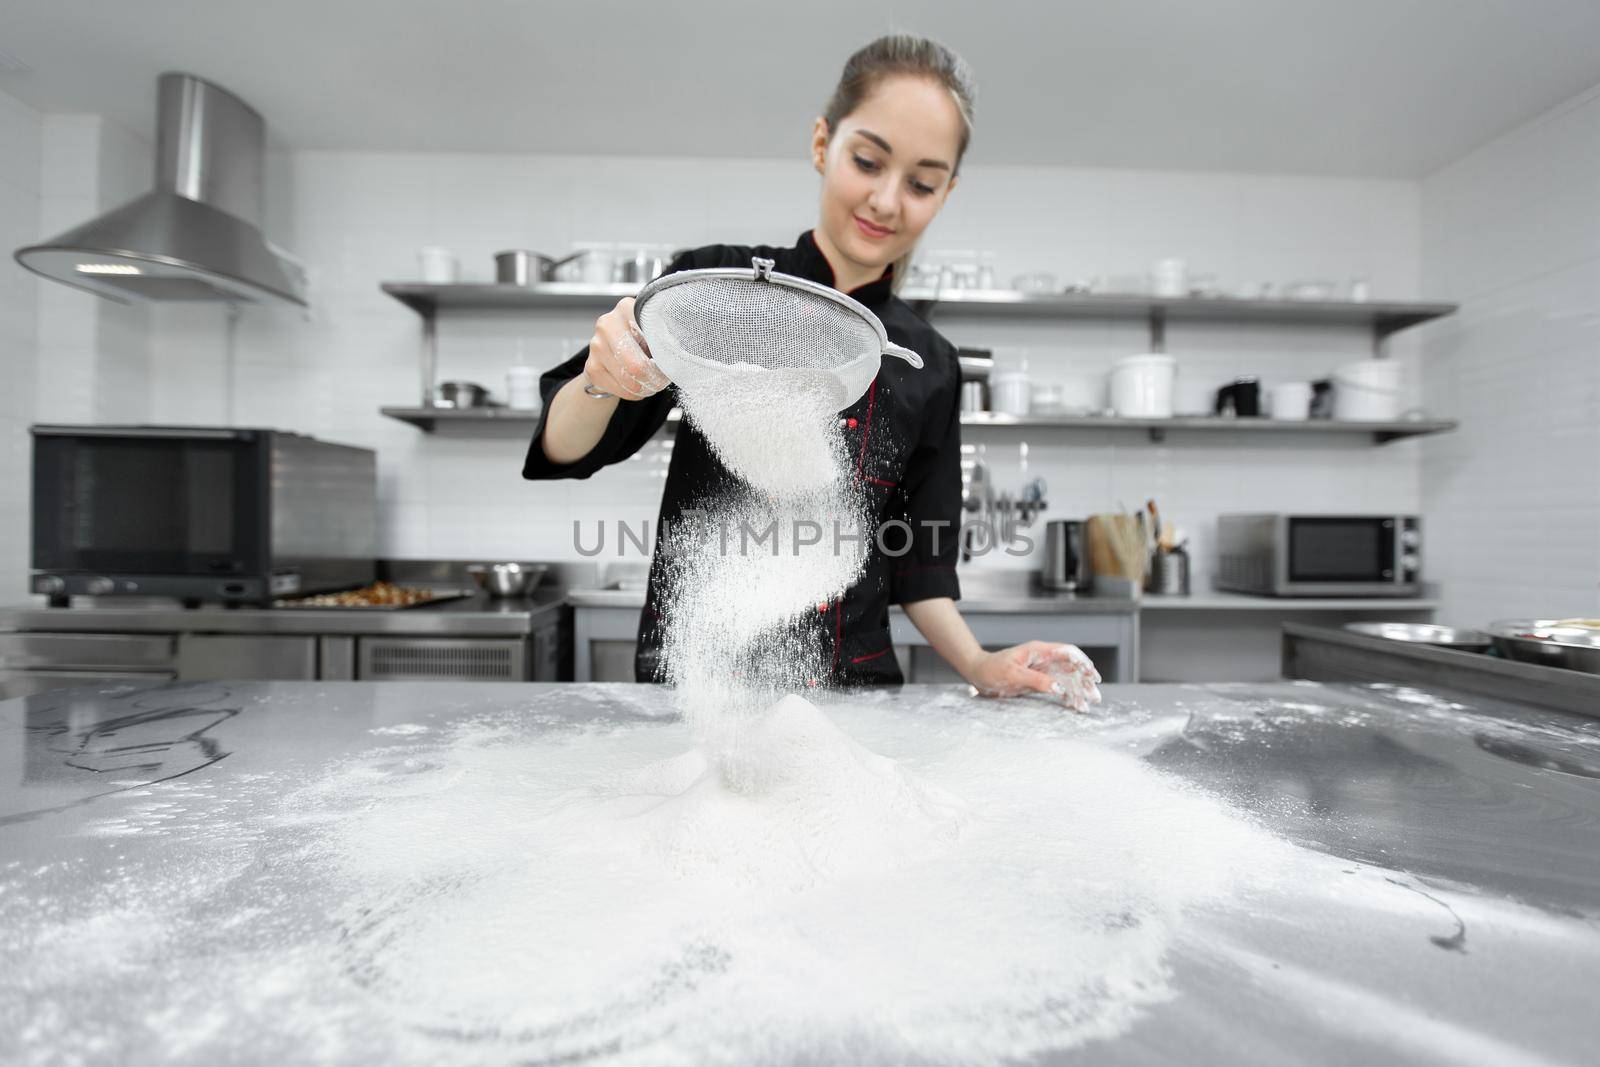 The pastry chef sows the flour through a sieve on the table by StudioPeace